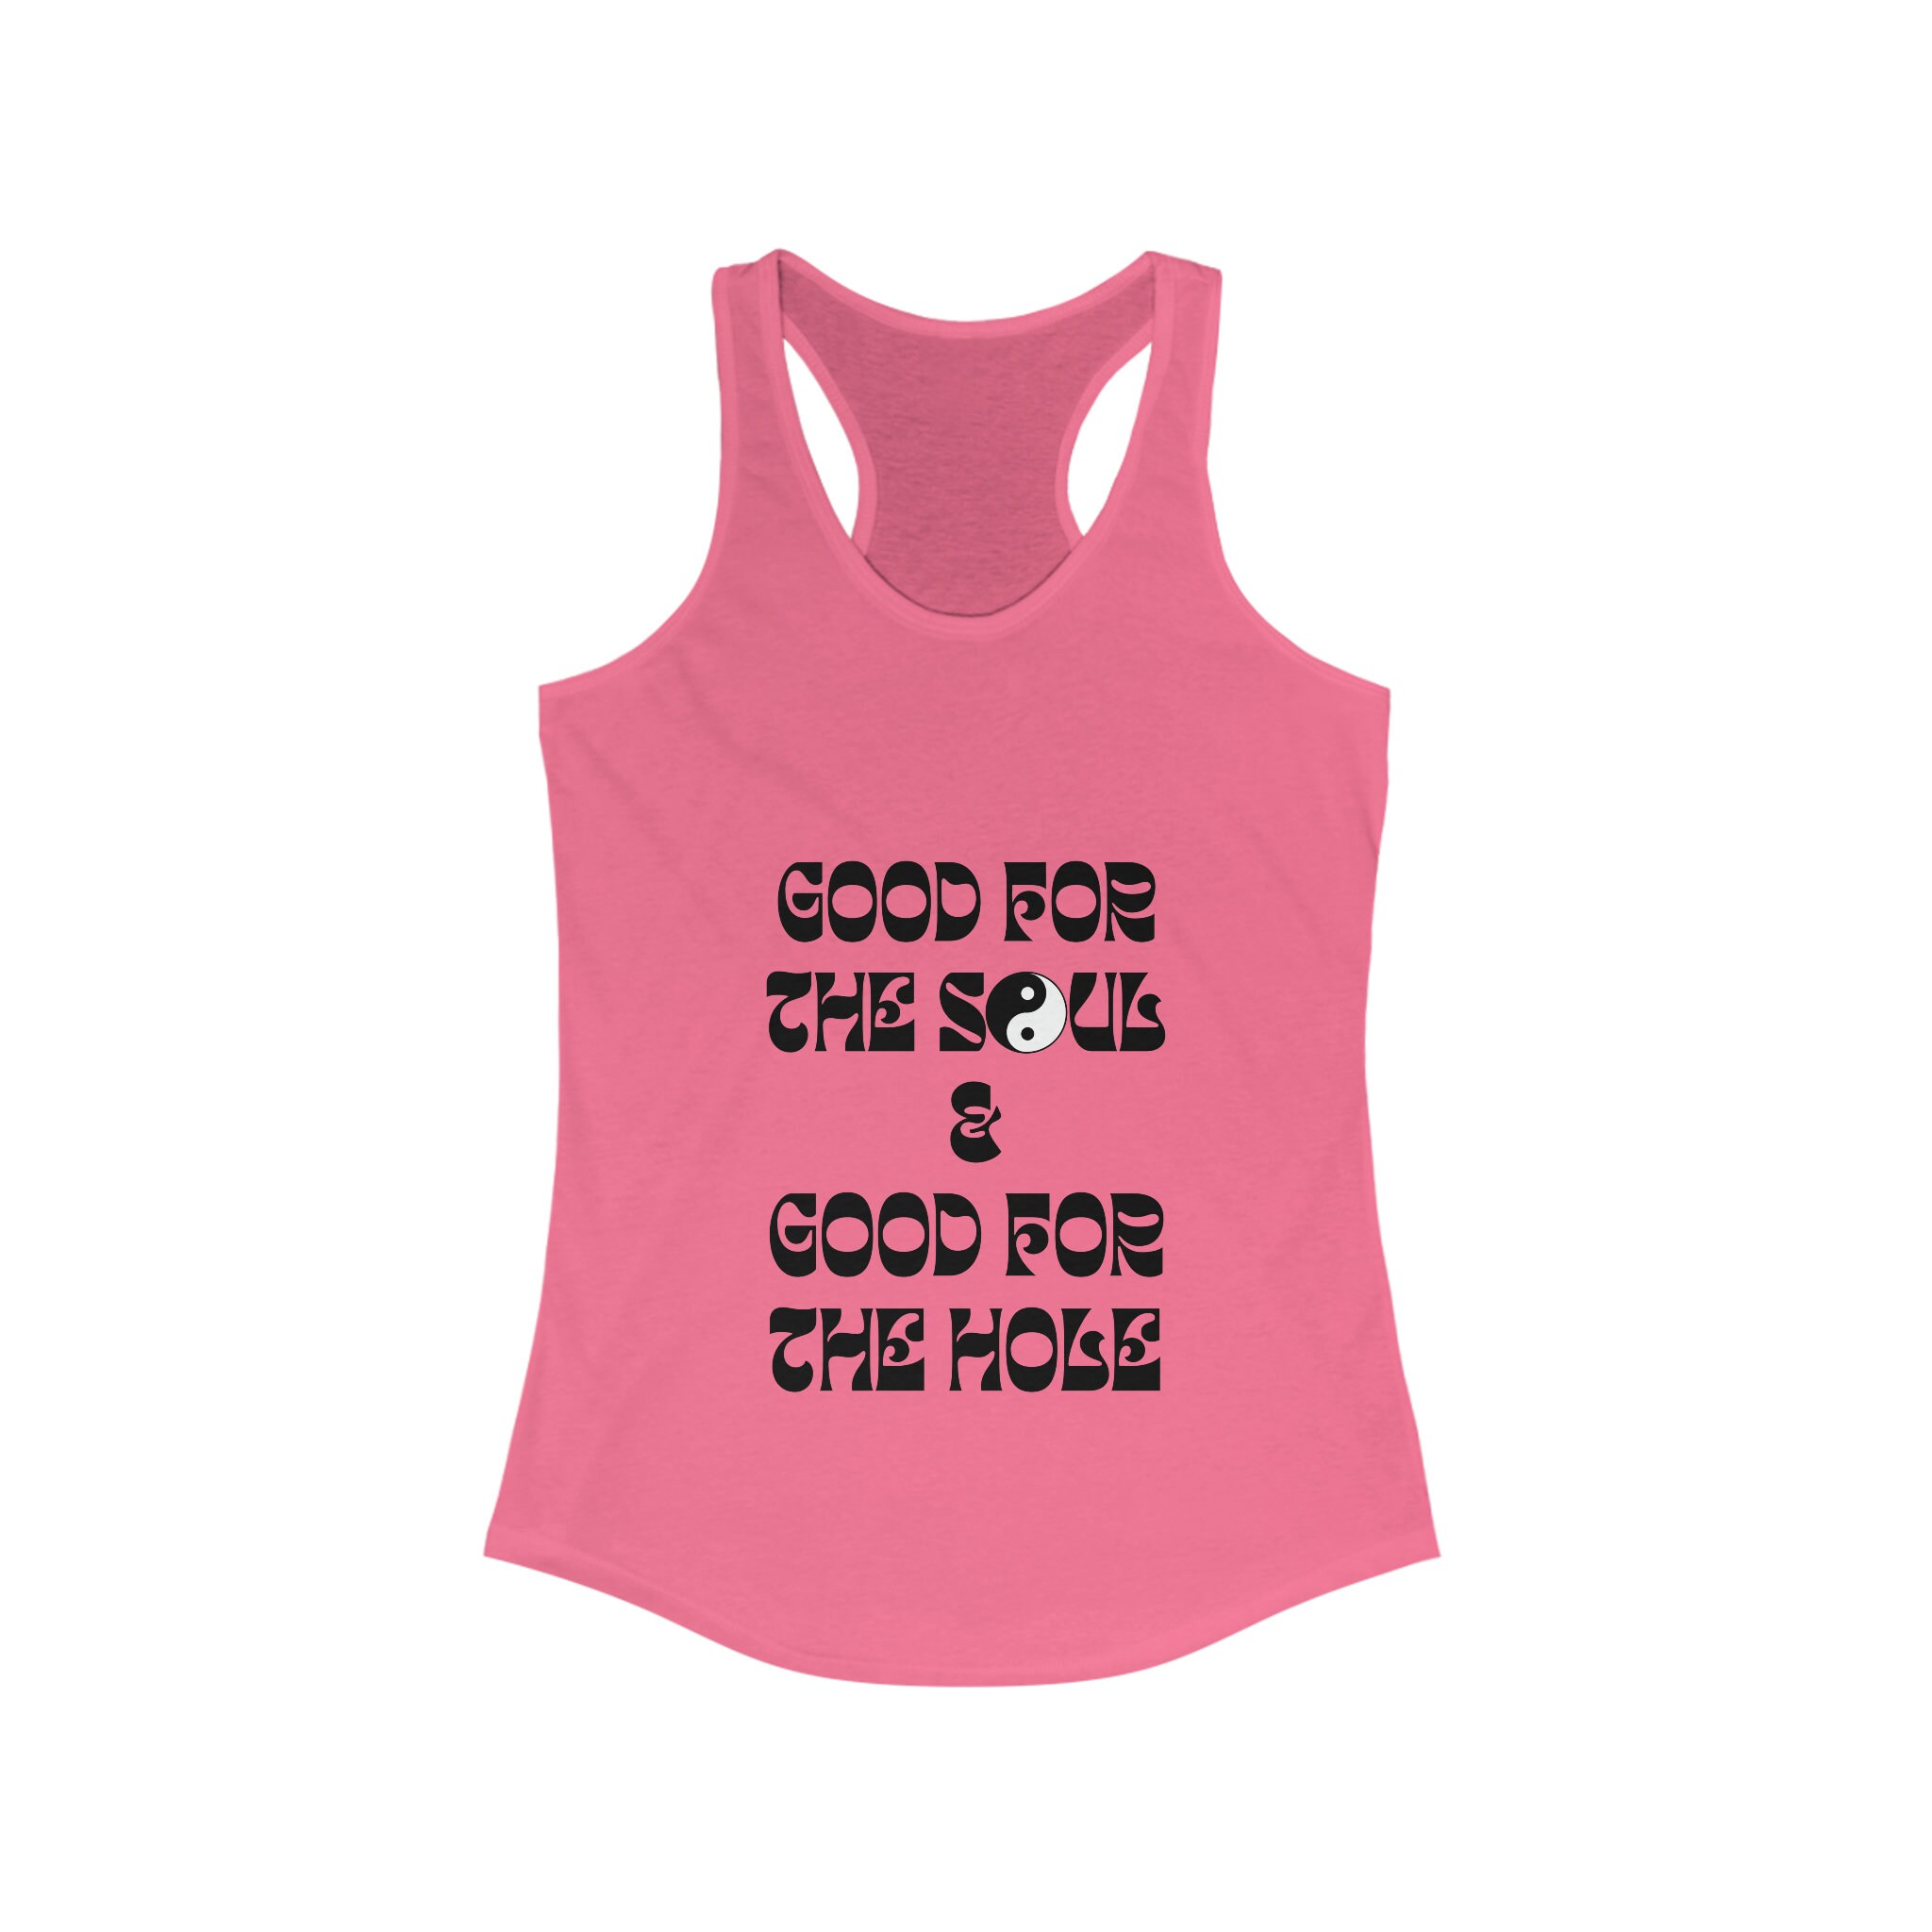 Lets Do This Gym Vest Women's Gym Clothes Gym Top Personalised